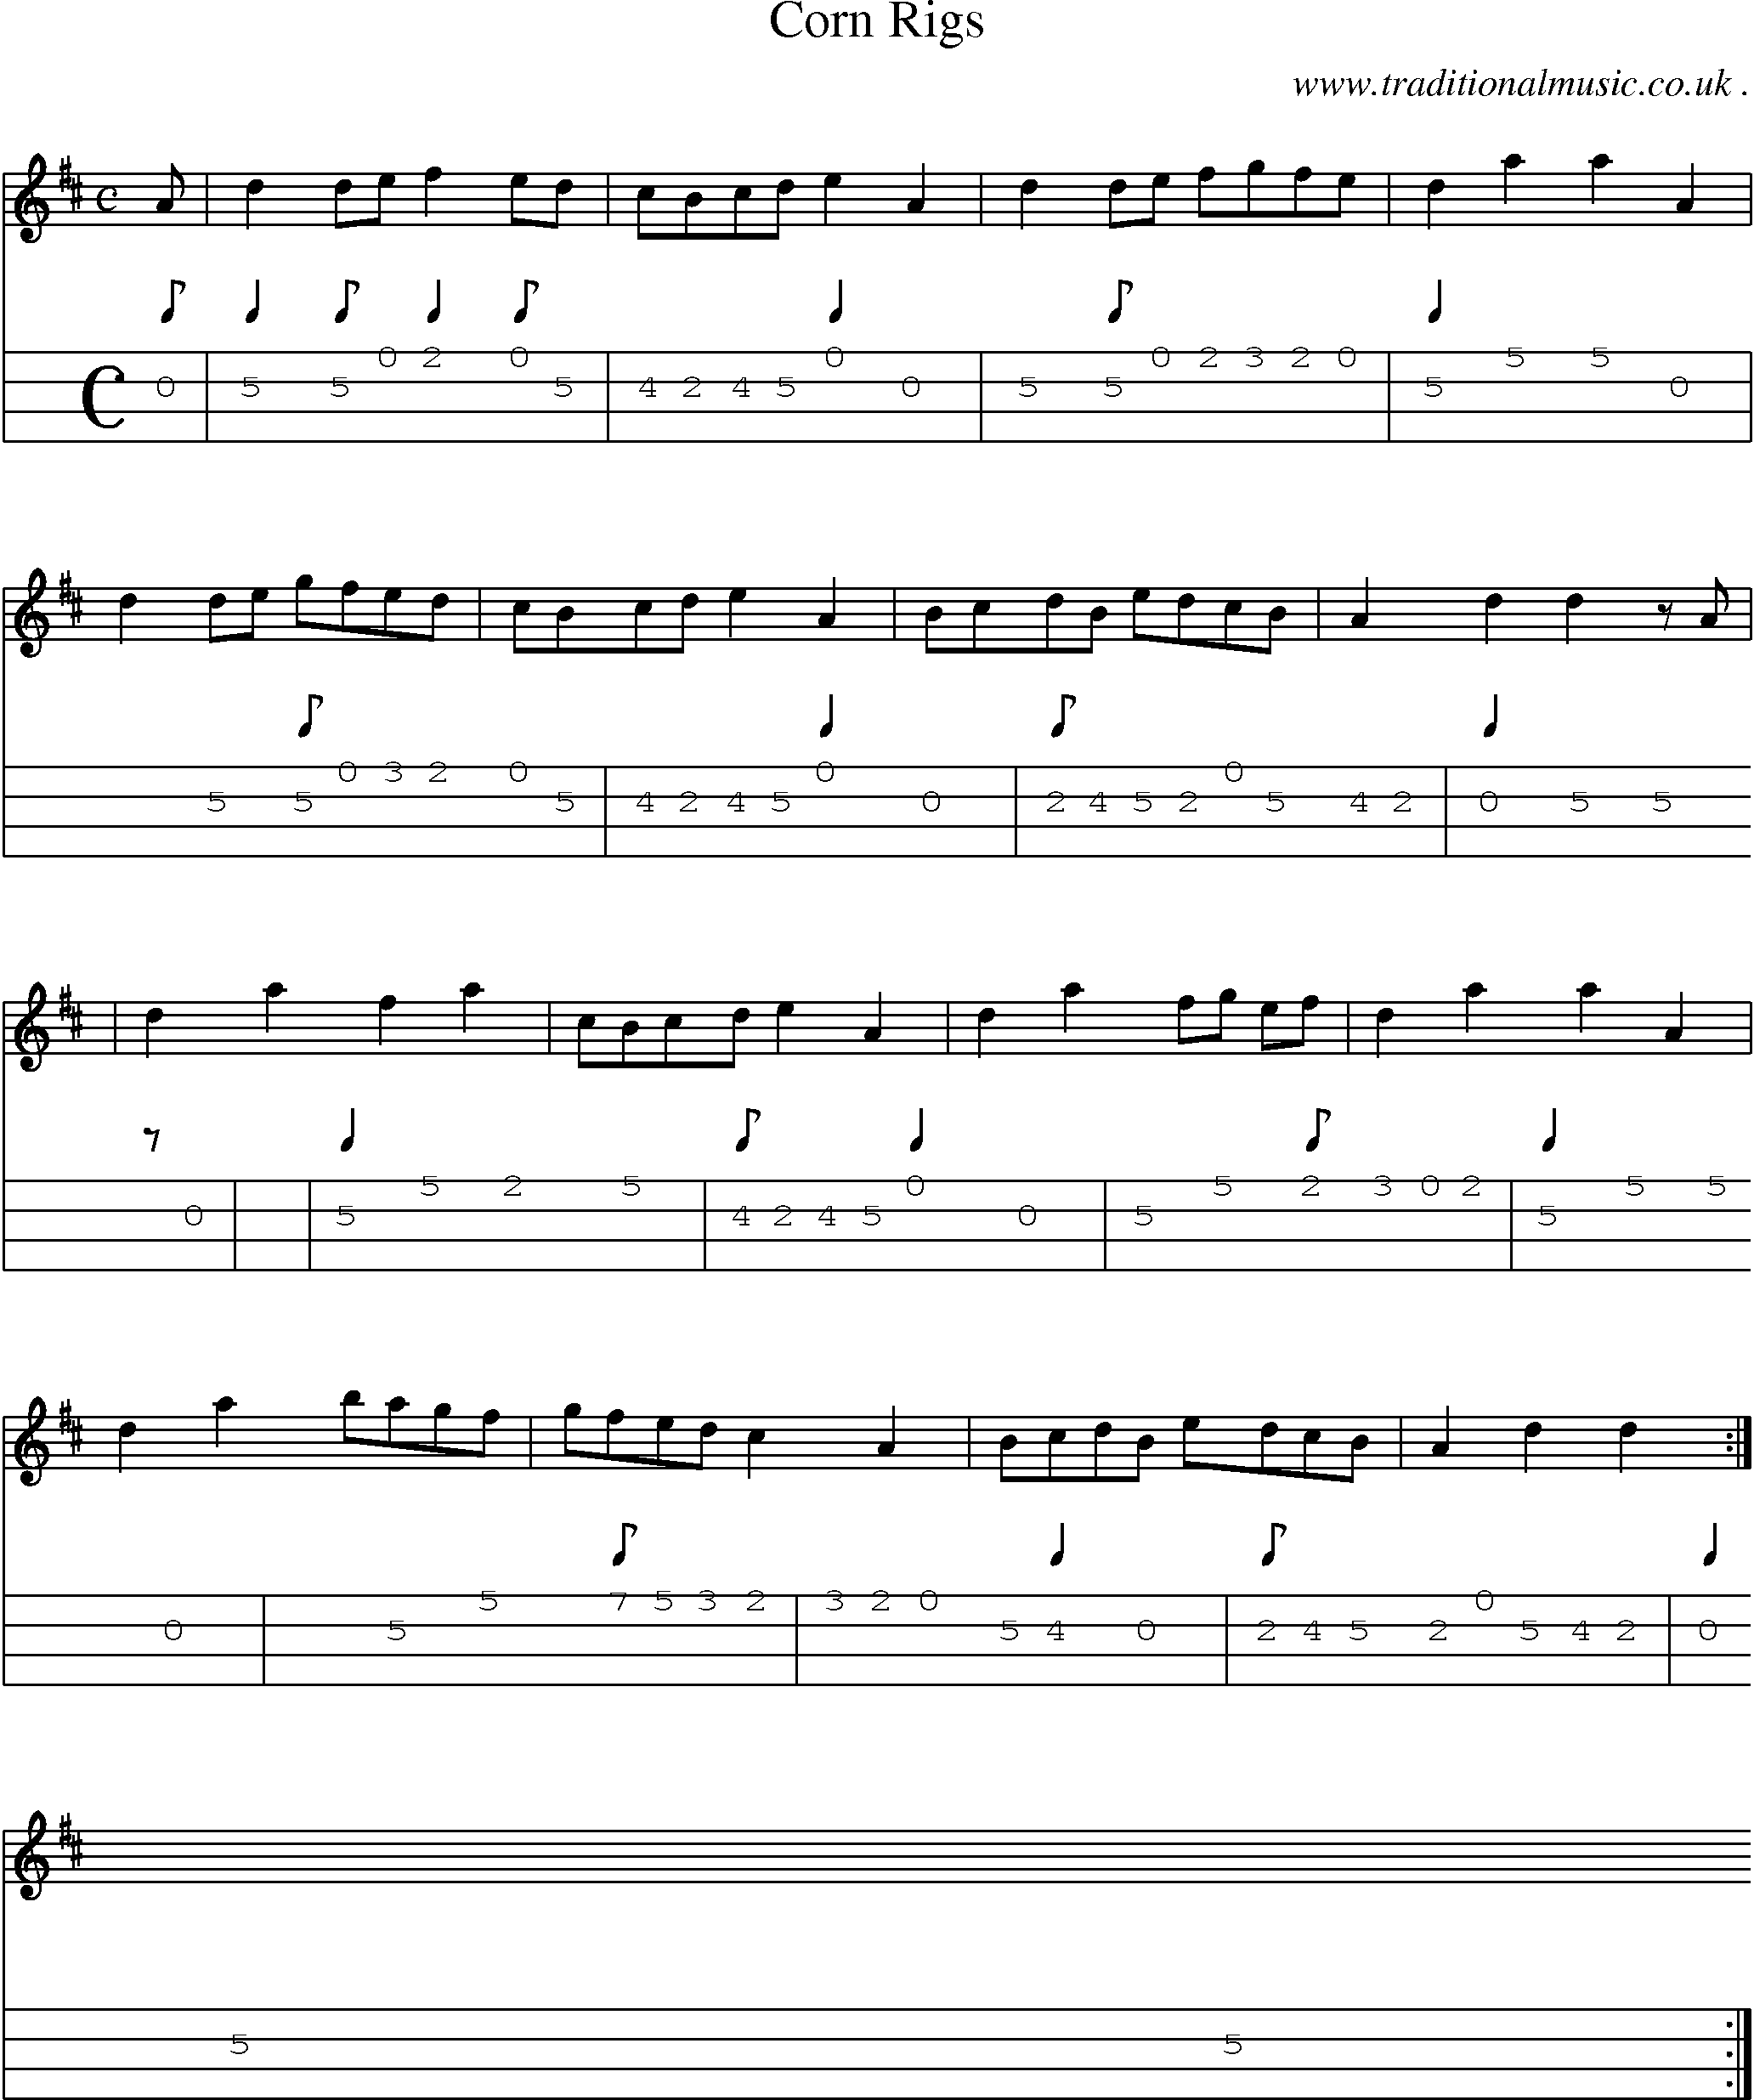 Sheet-music  score, Chords and Mandolin Tabs for Corn Rigs